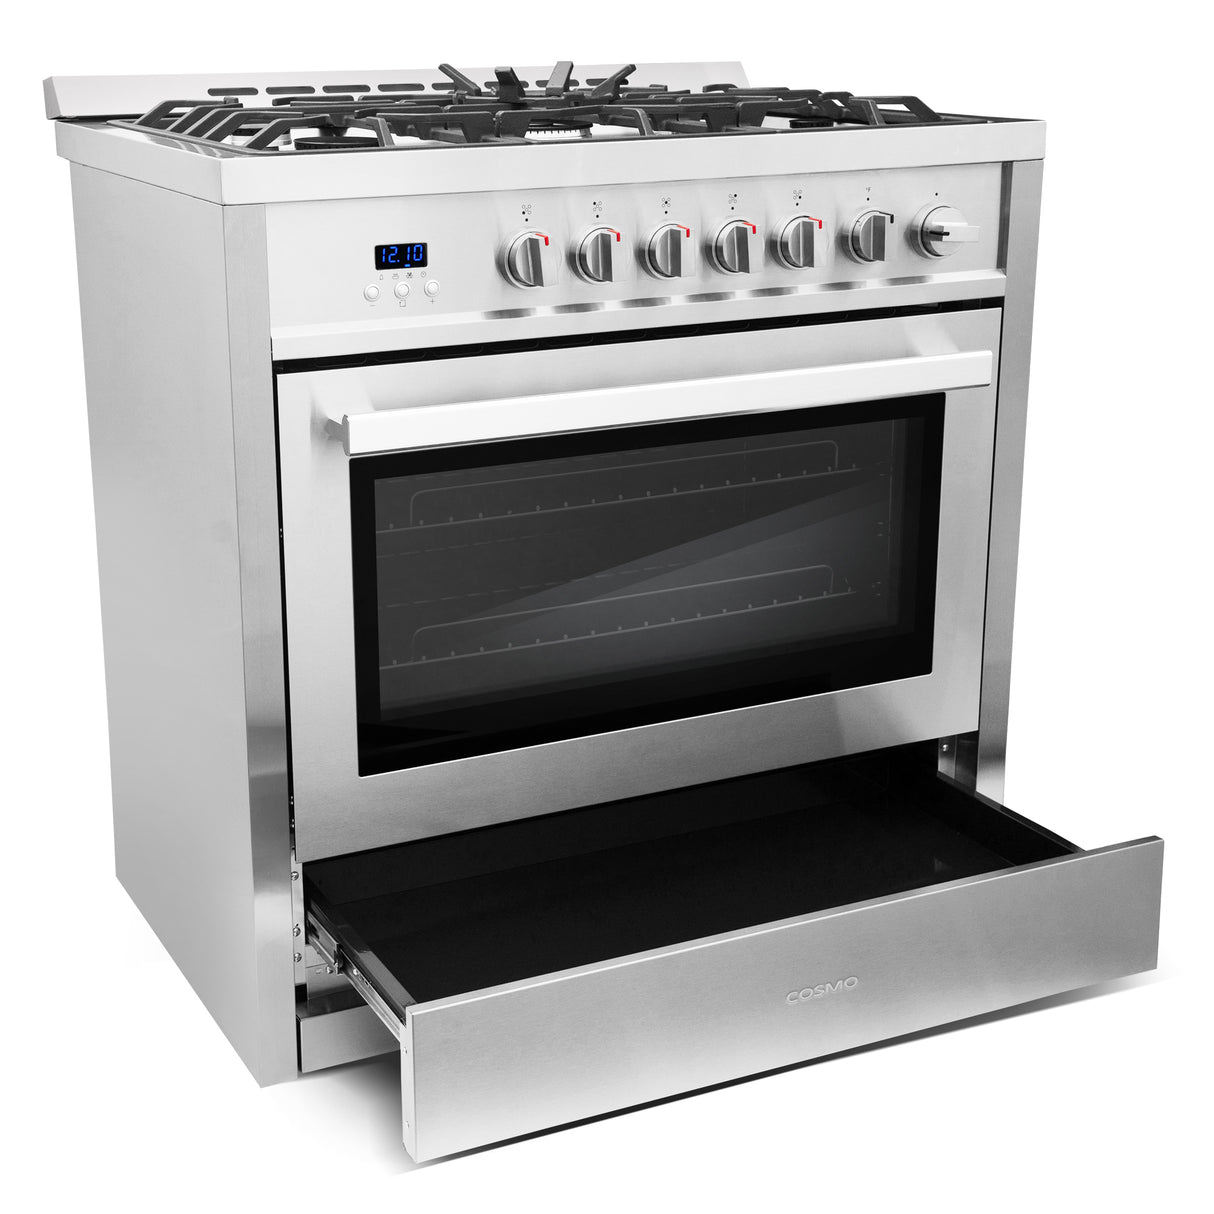 Cosmo 36" 3.8 cu. ft. Single Oven Gas Range with 5 Burner Cooktop and Heavy Duty Cast Iron Grates in Stainless Steel